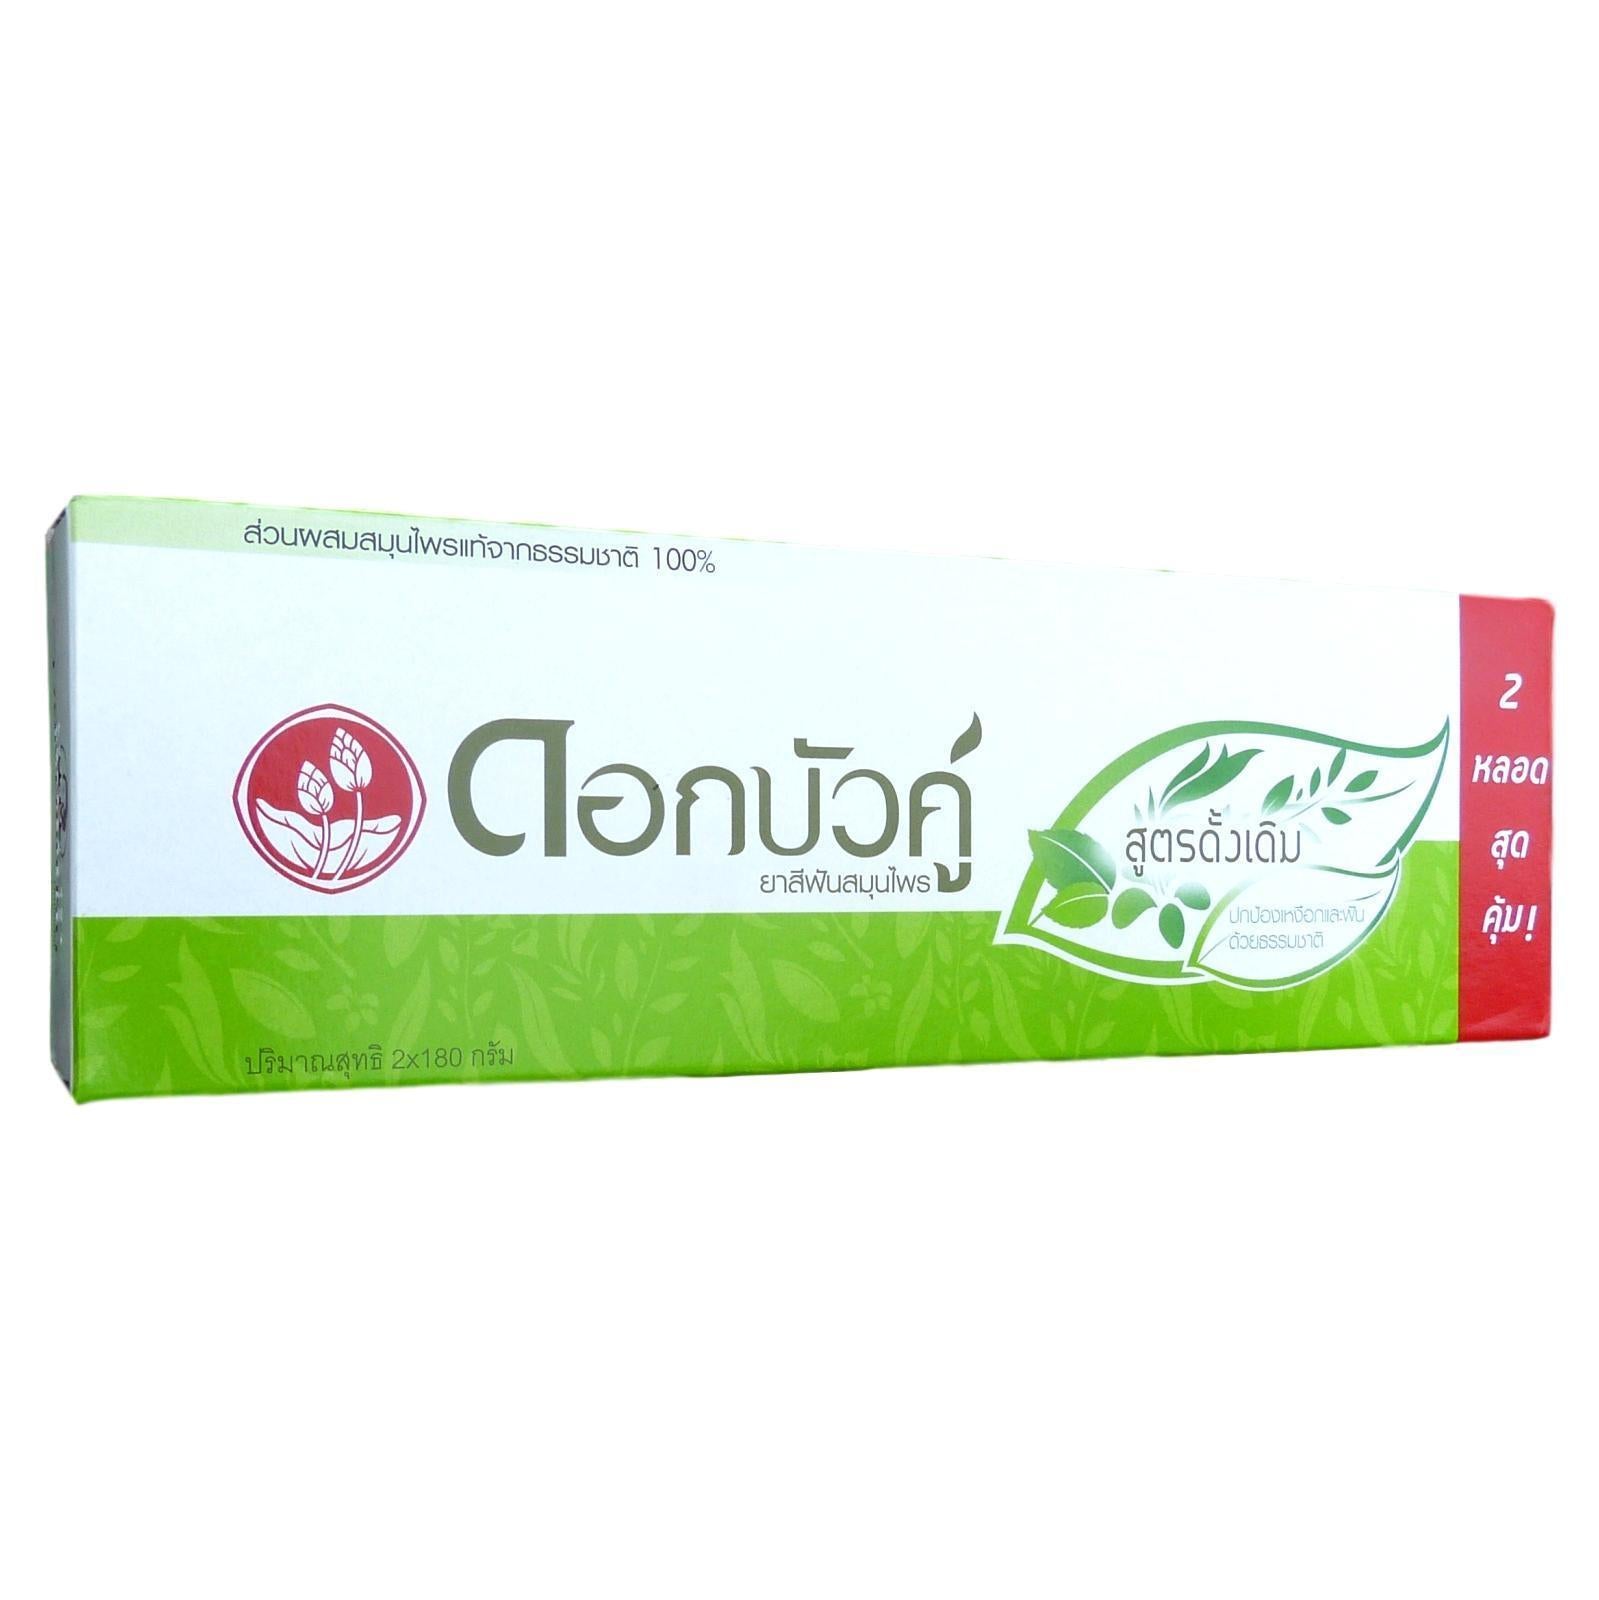 Twin Lotus Thai Herbal Natural Black Toothpaste 180g Pack of 2 - Asian Beauty Supply